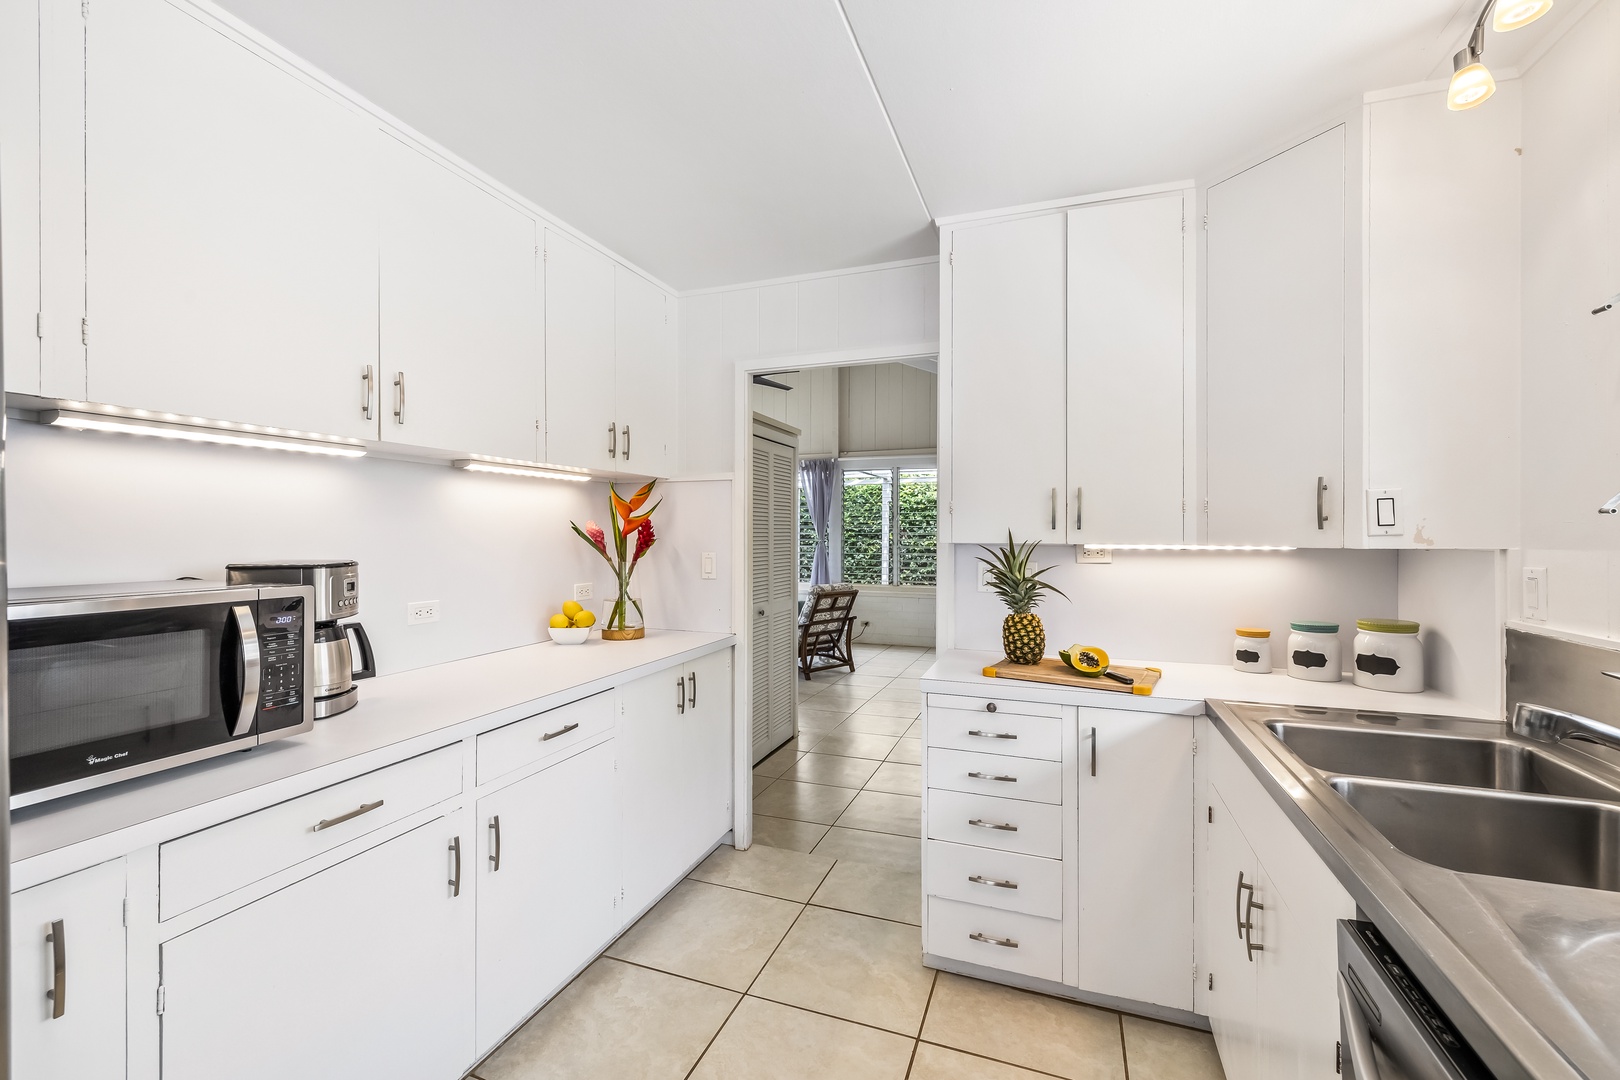 Honolulu Vacation Rentals, Kahala Cottage - The spacious kitchen area with plenty of storage spaces.